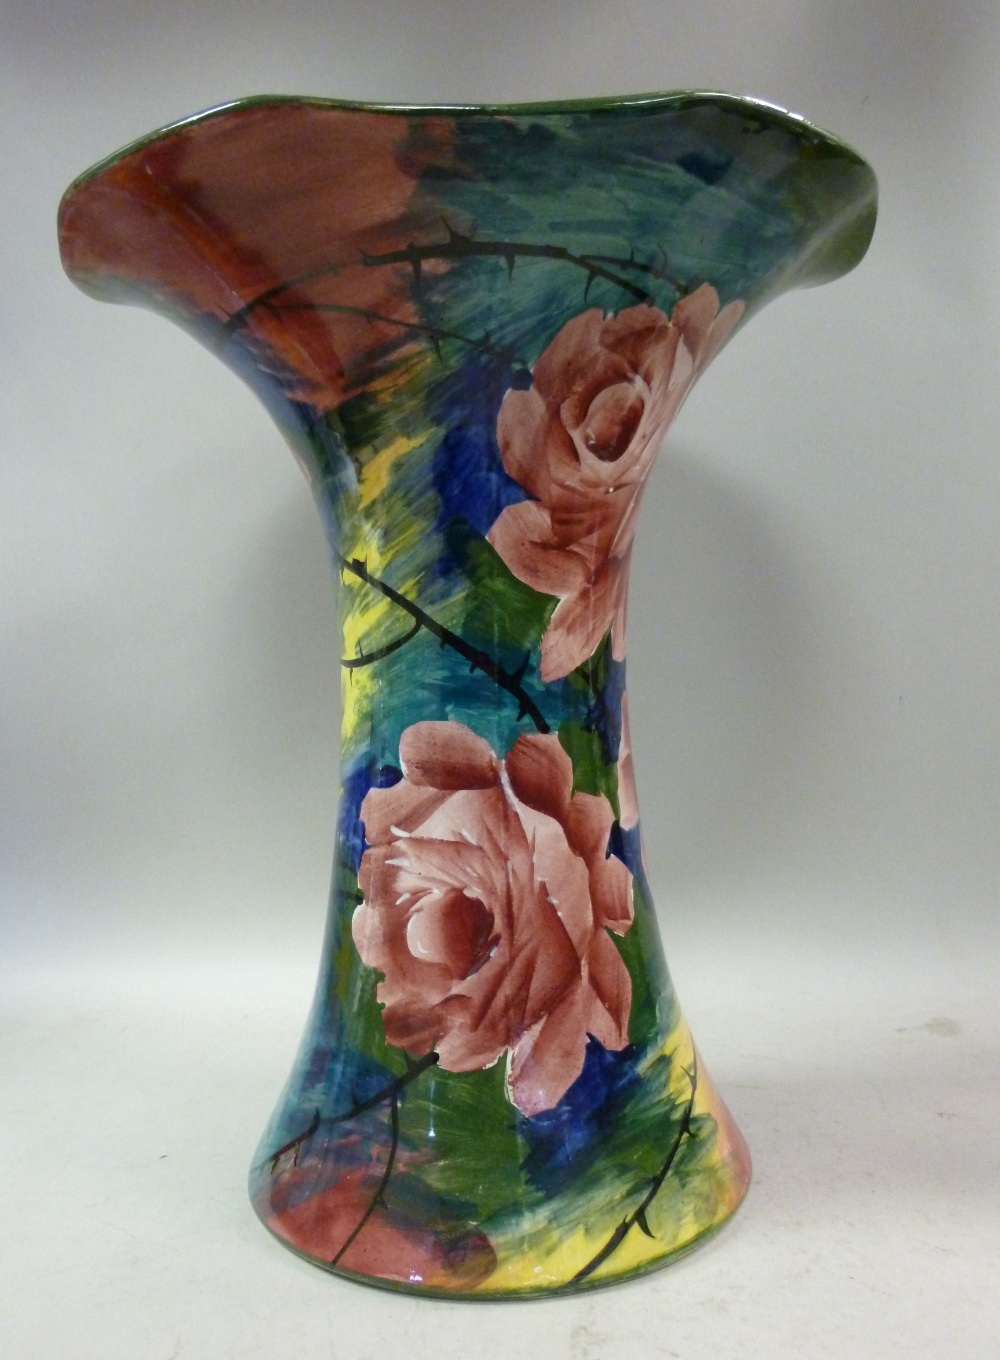 A Wemyss pottery vase of waisted cylindrical form, having a flared, wavy rim, decorated with cabbage